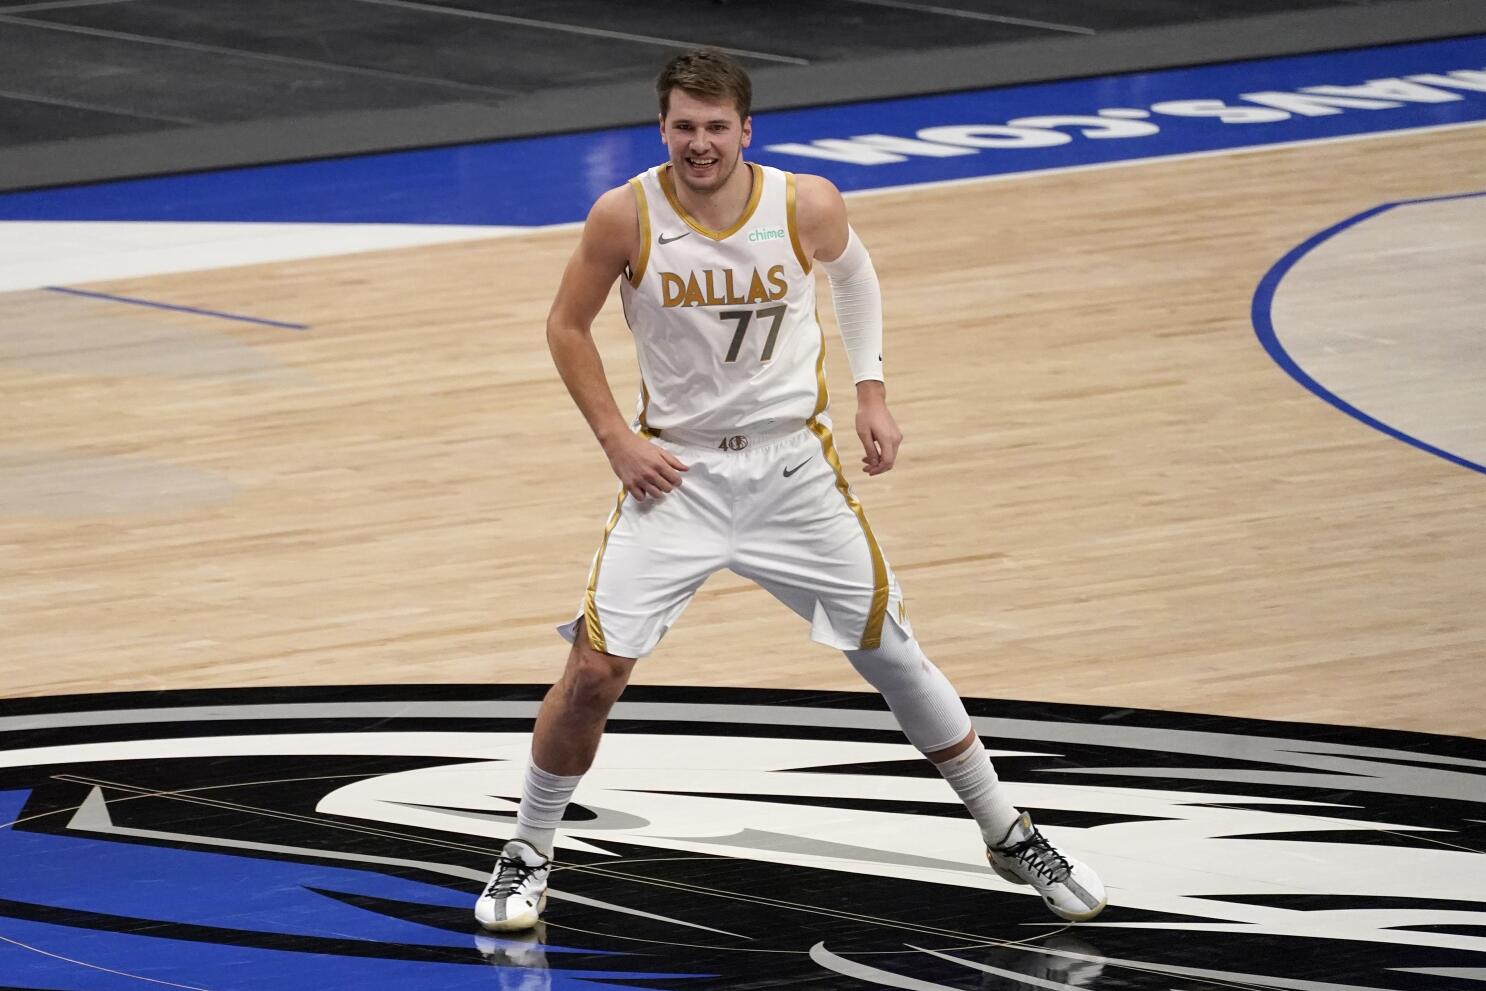 Can Suns stop Mavericks' Luka Doncic from single-handedly winning series?